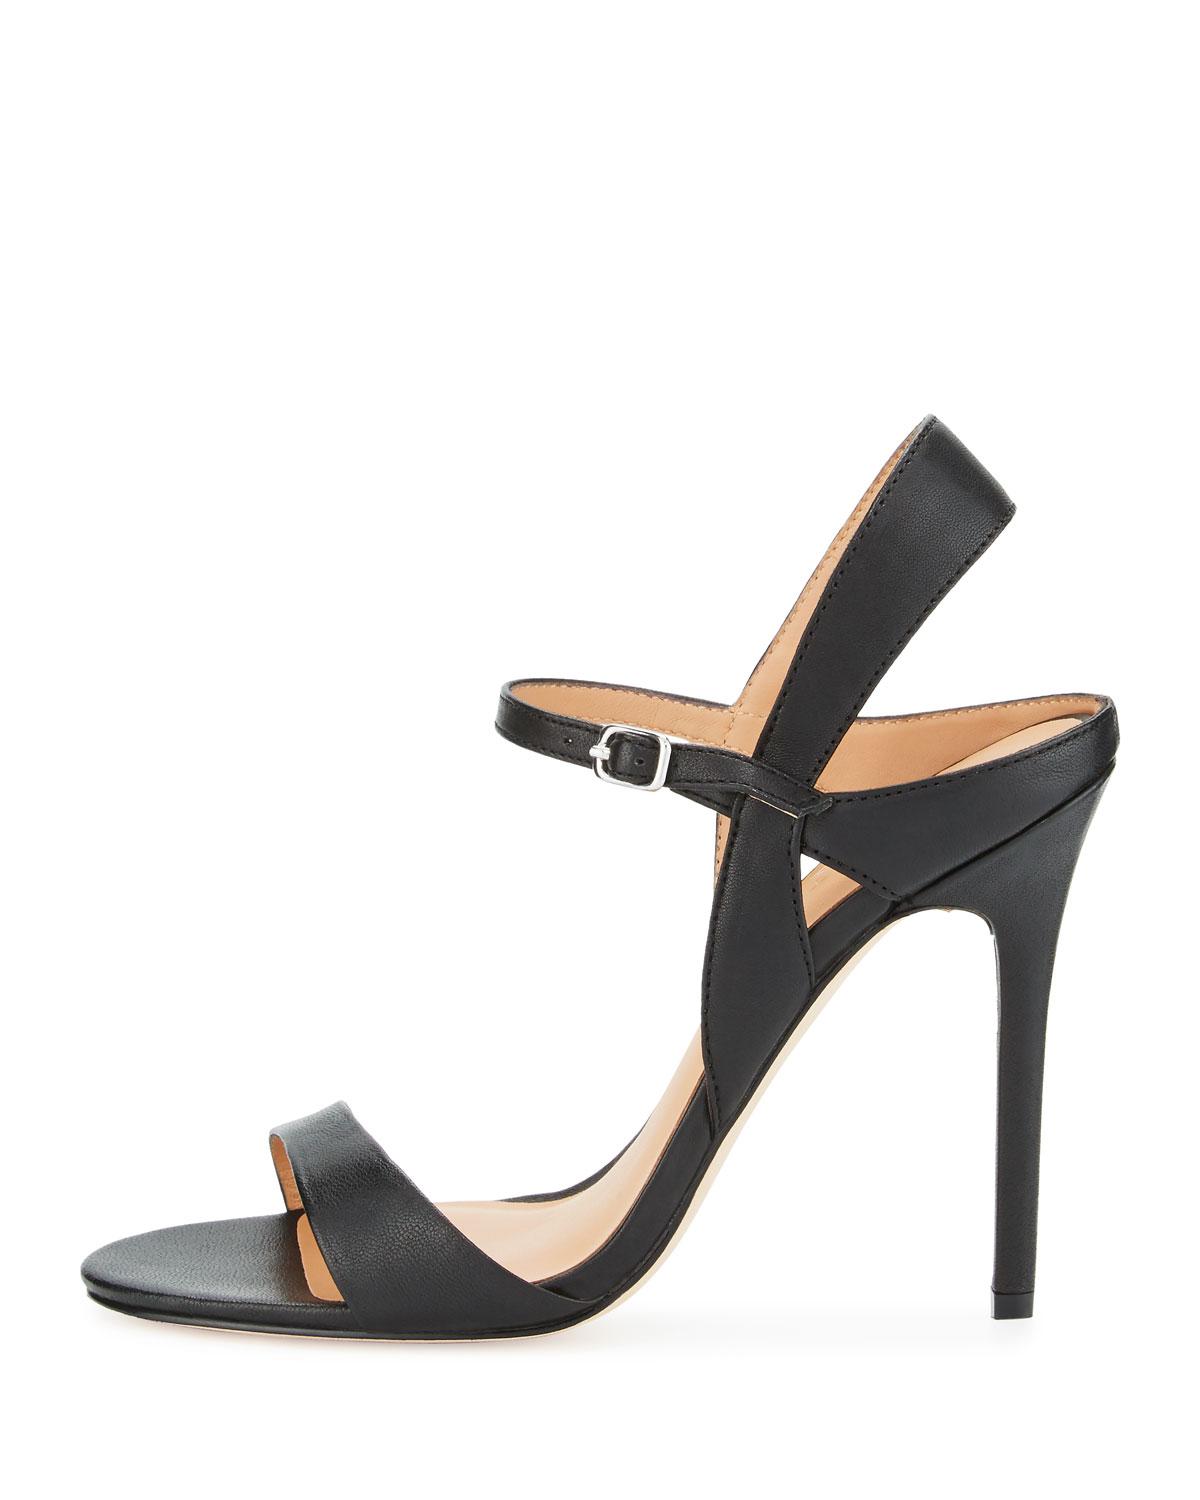 Lyst - Halston Heritage Ainsley Leather 115mm Sandal in Black